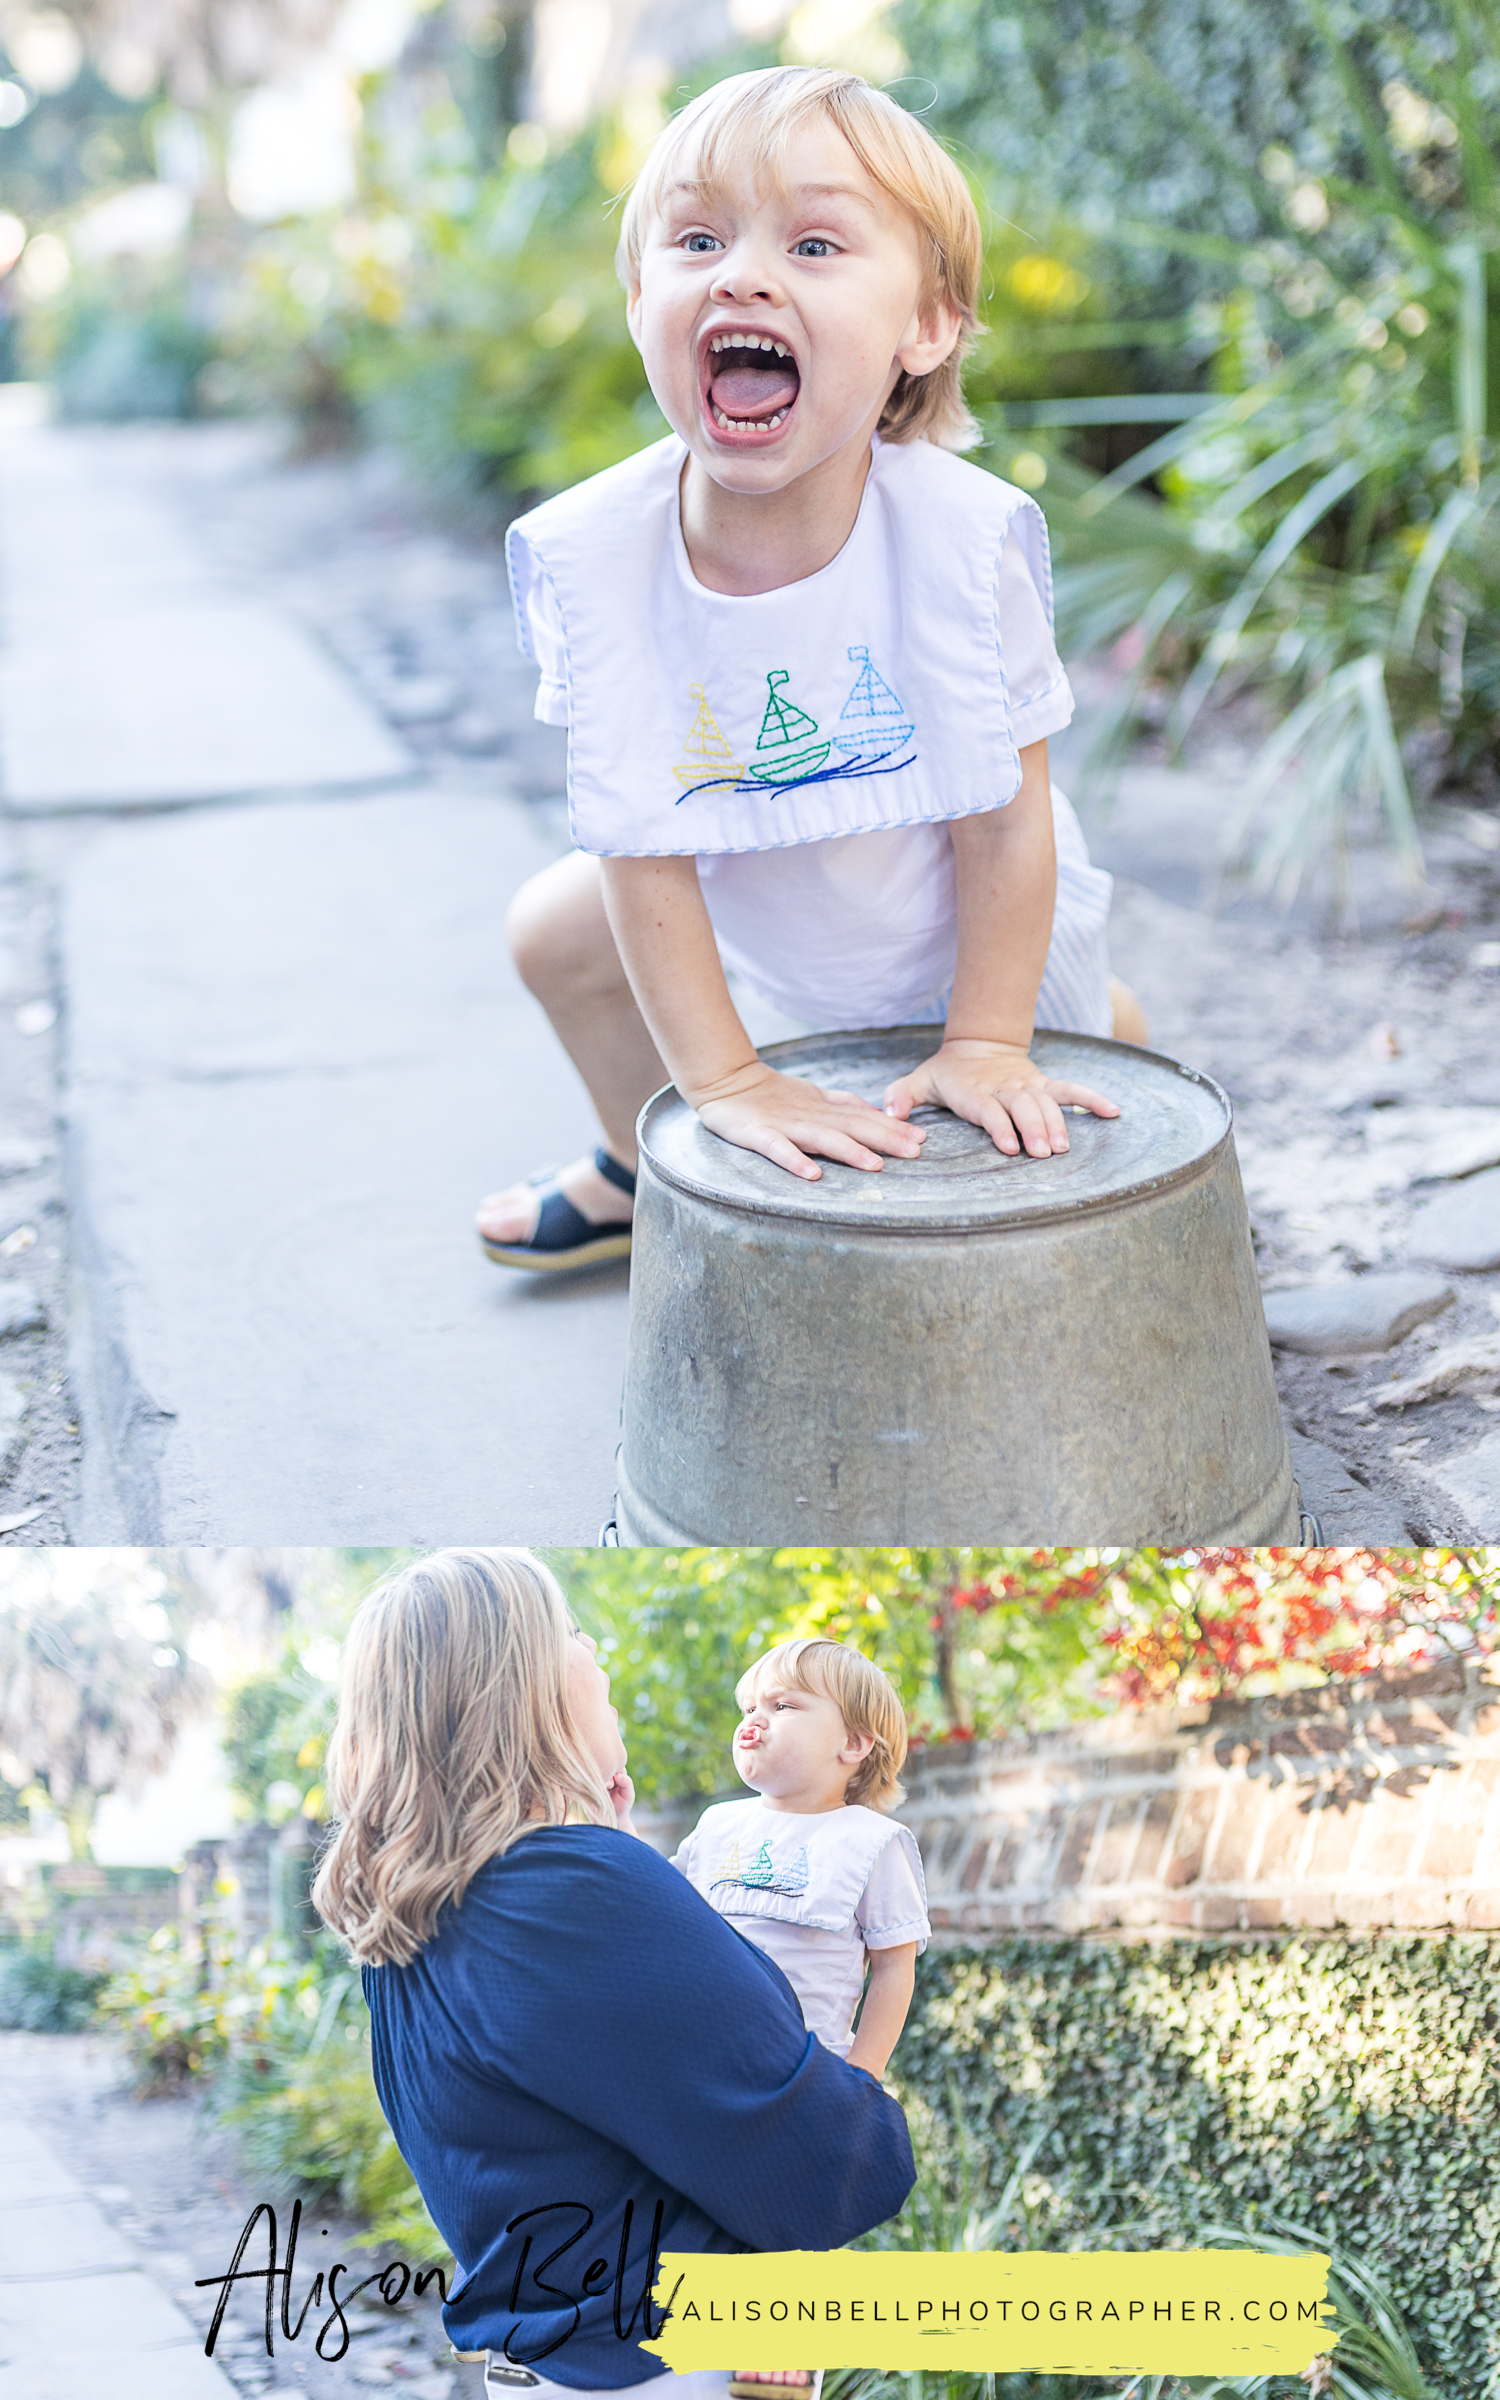 Historic charleston, south carolina family photo sessions by alison bell photographer